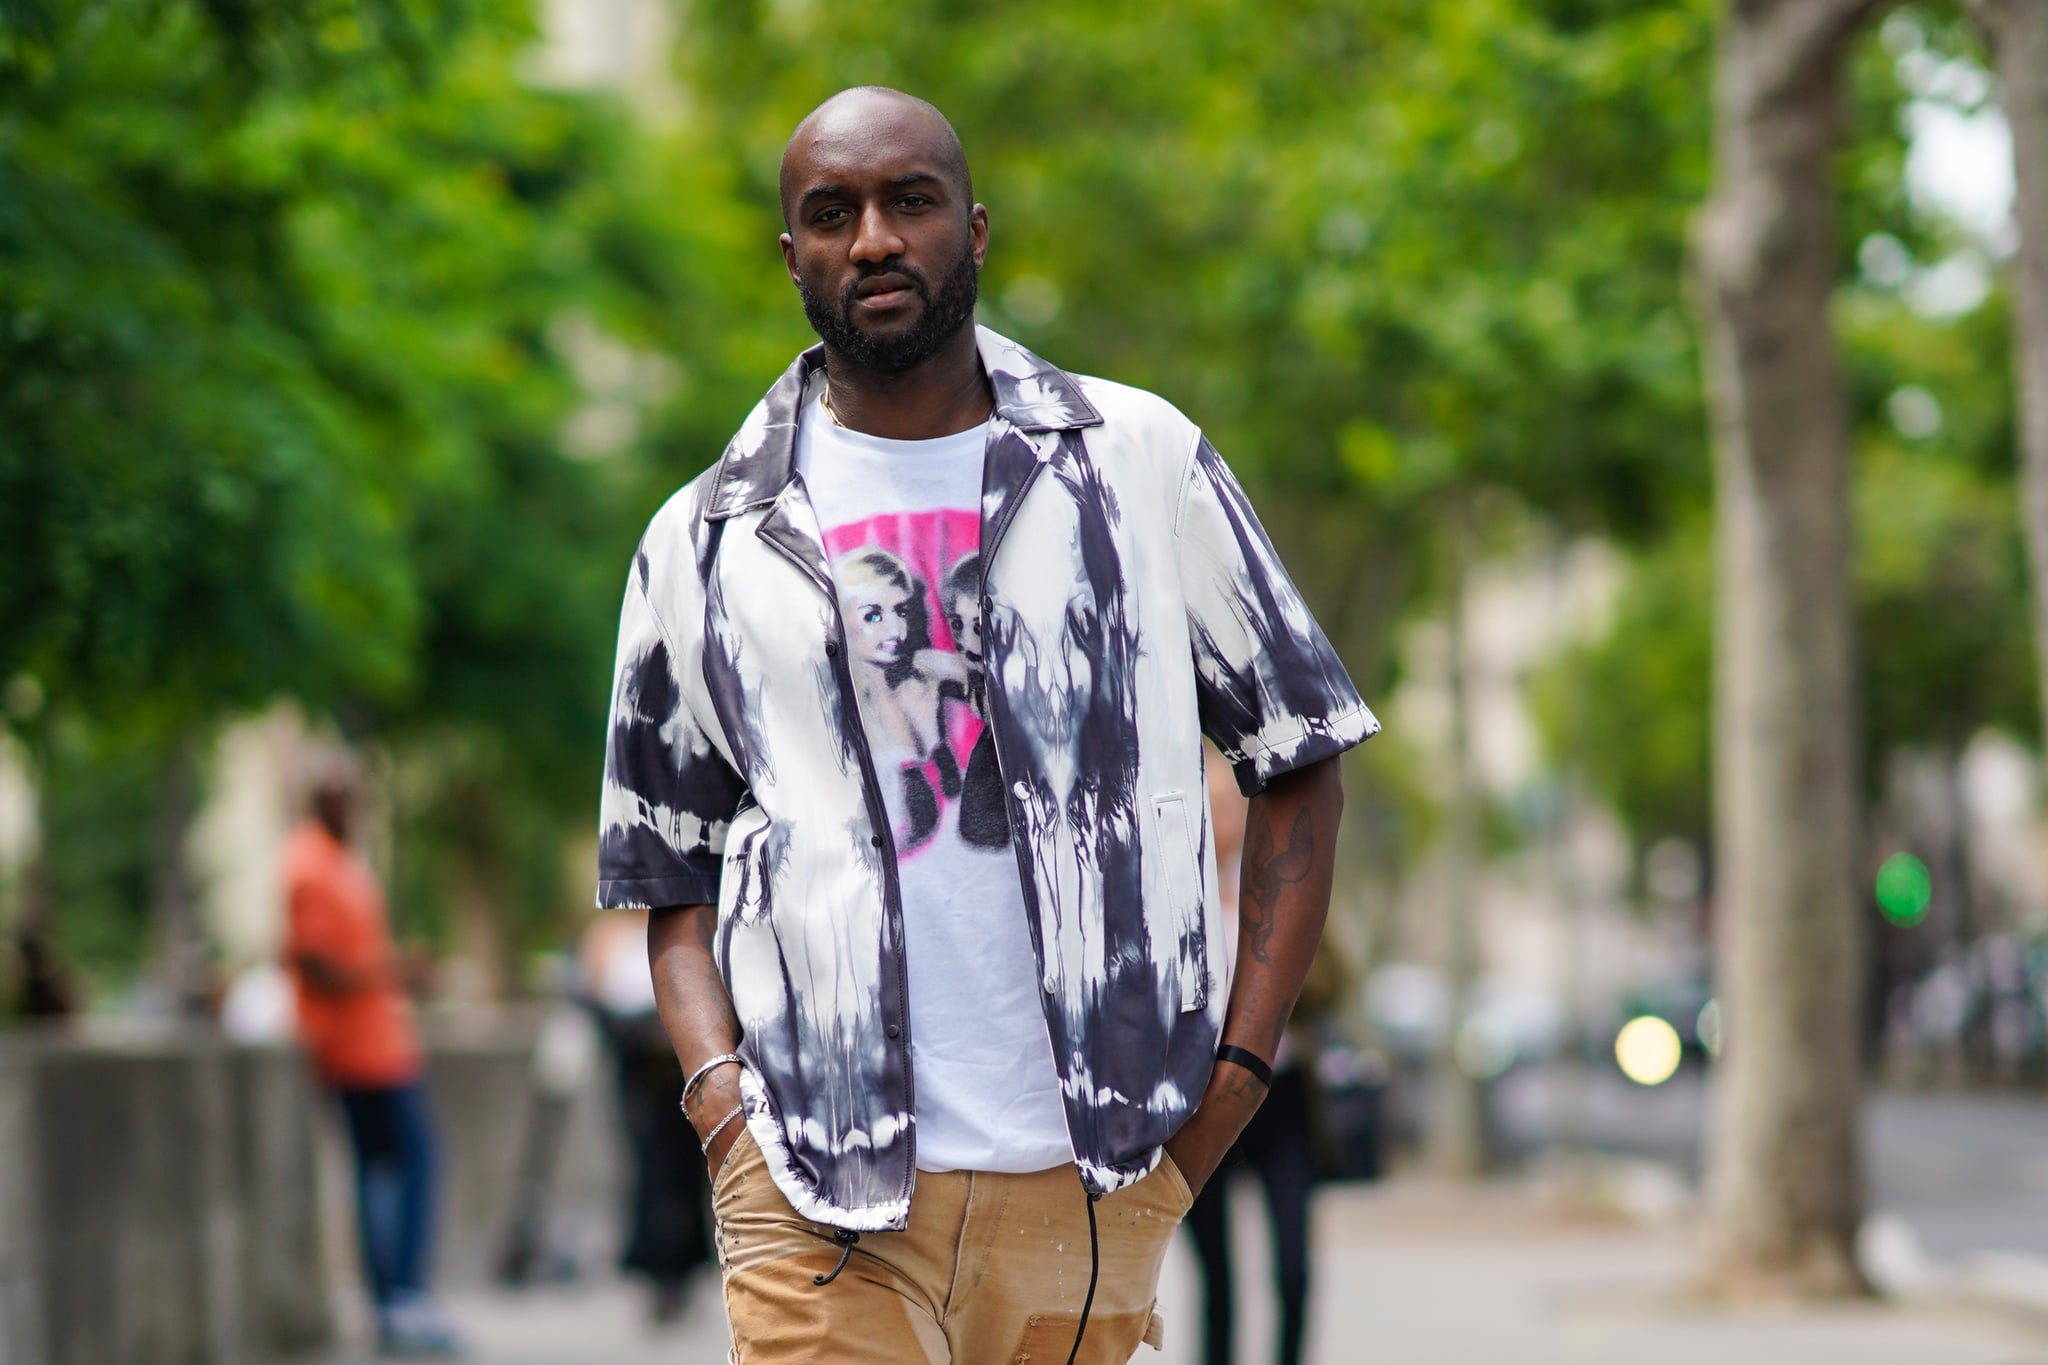 PARIS, FRANCE - JUNE 18: Virgil Abloh wears a white t-shirt with a picture print, a tie and dye black and white shirt, outside Heron Preston, during Paris Fashion Week - Menswear Spring/Summer 2020, on June 18, 2019 in Paris, France. (Photo by Edward Berthelot/Getty Images)